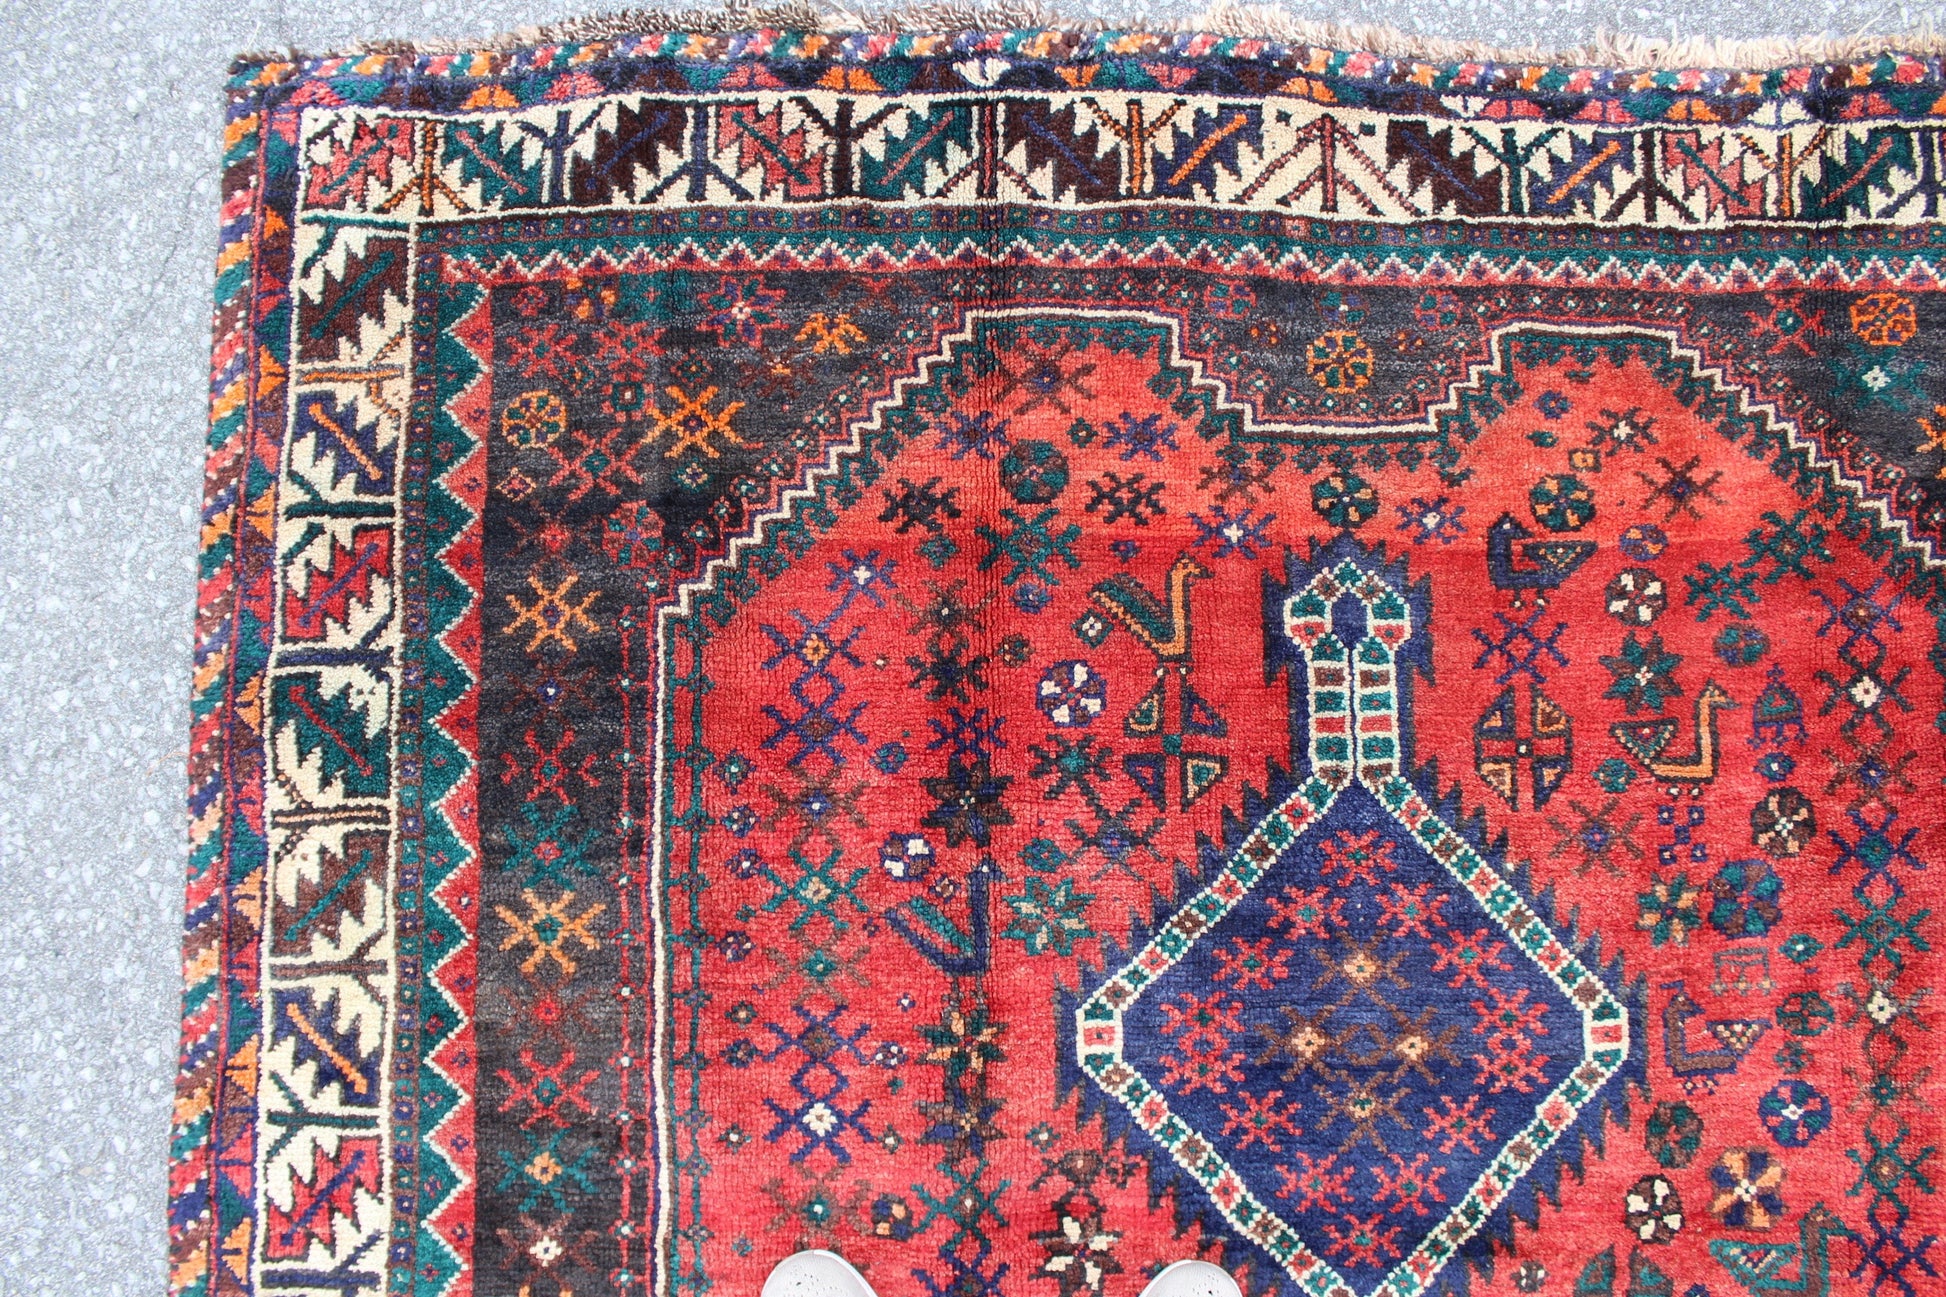 Vintage Persian 5x6 Multi Color Handmade Rug with